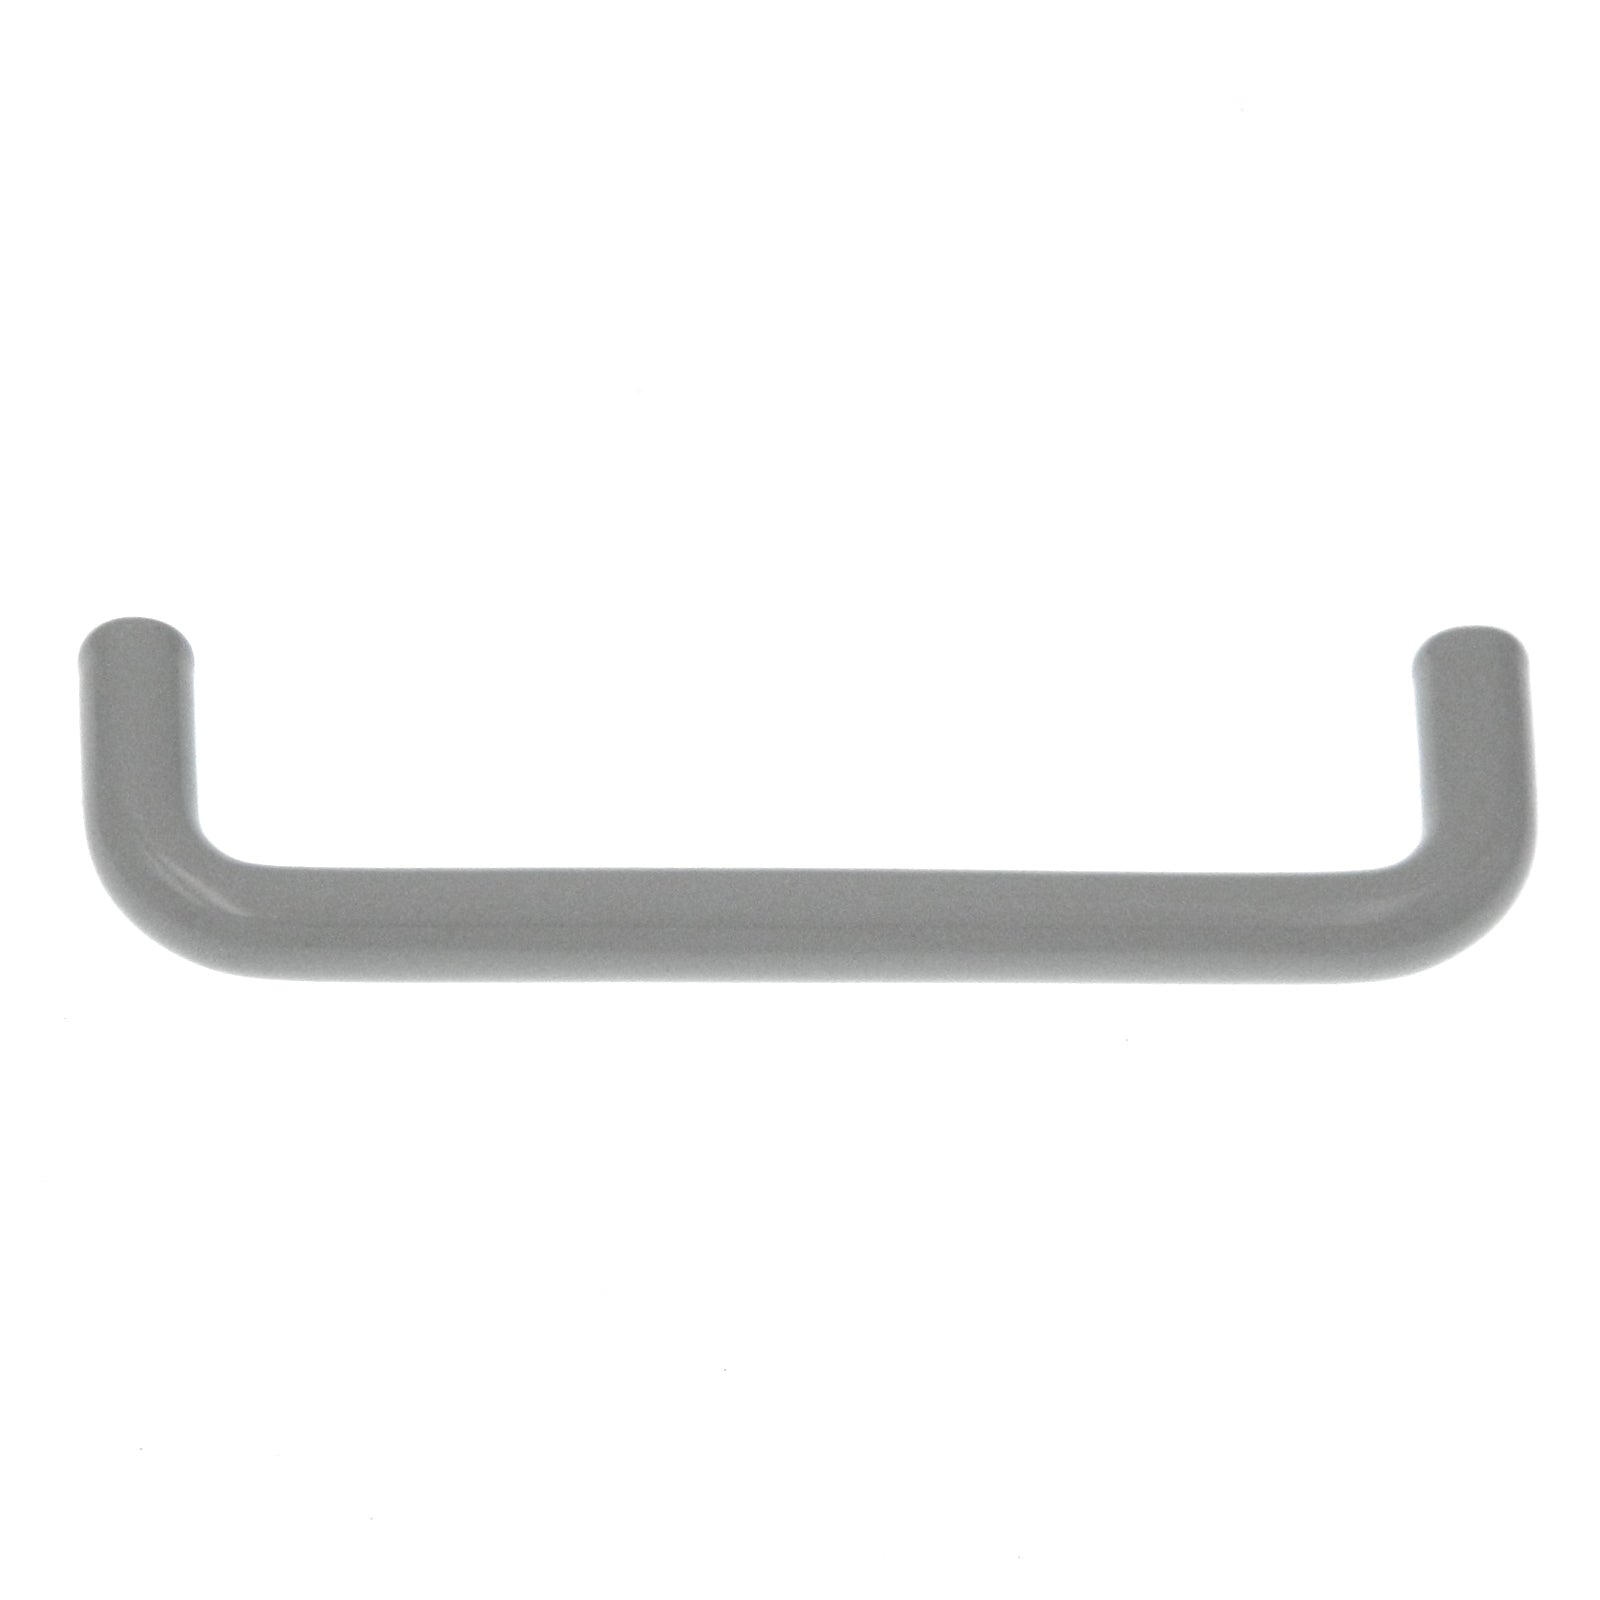 10 Pack Keeler Wire Pulls PW396-23 Light Grey 3 3/4" (96mm)cc Solid Brass Wire Pull